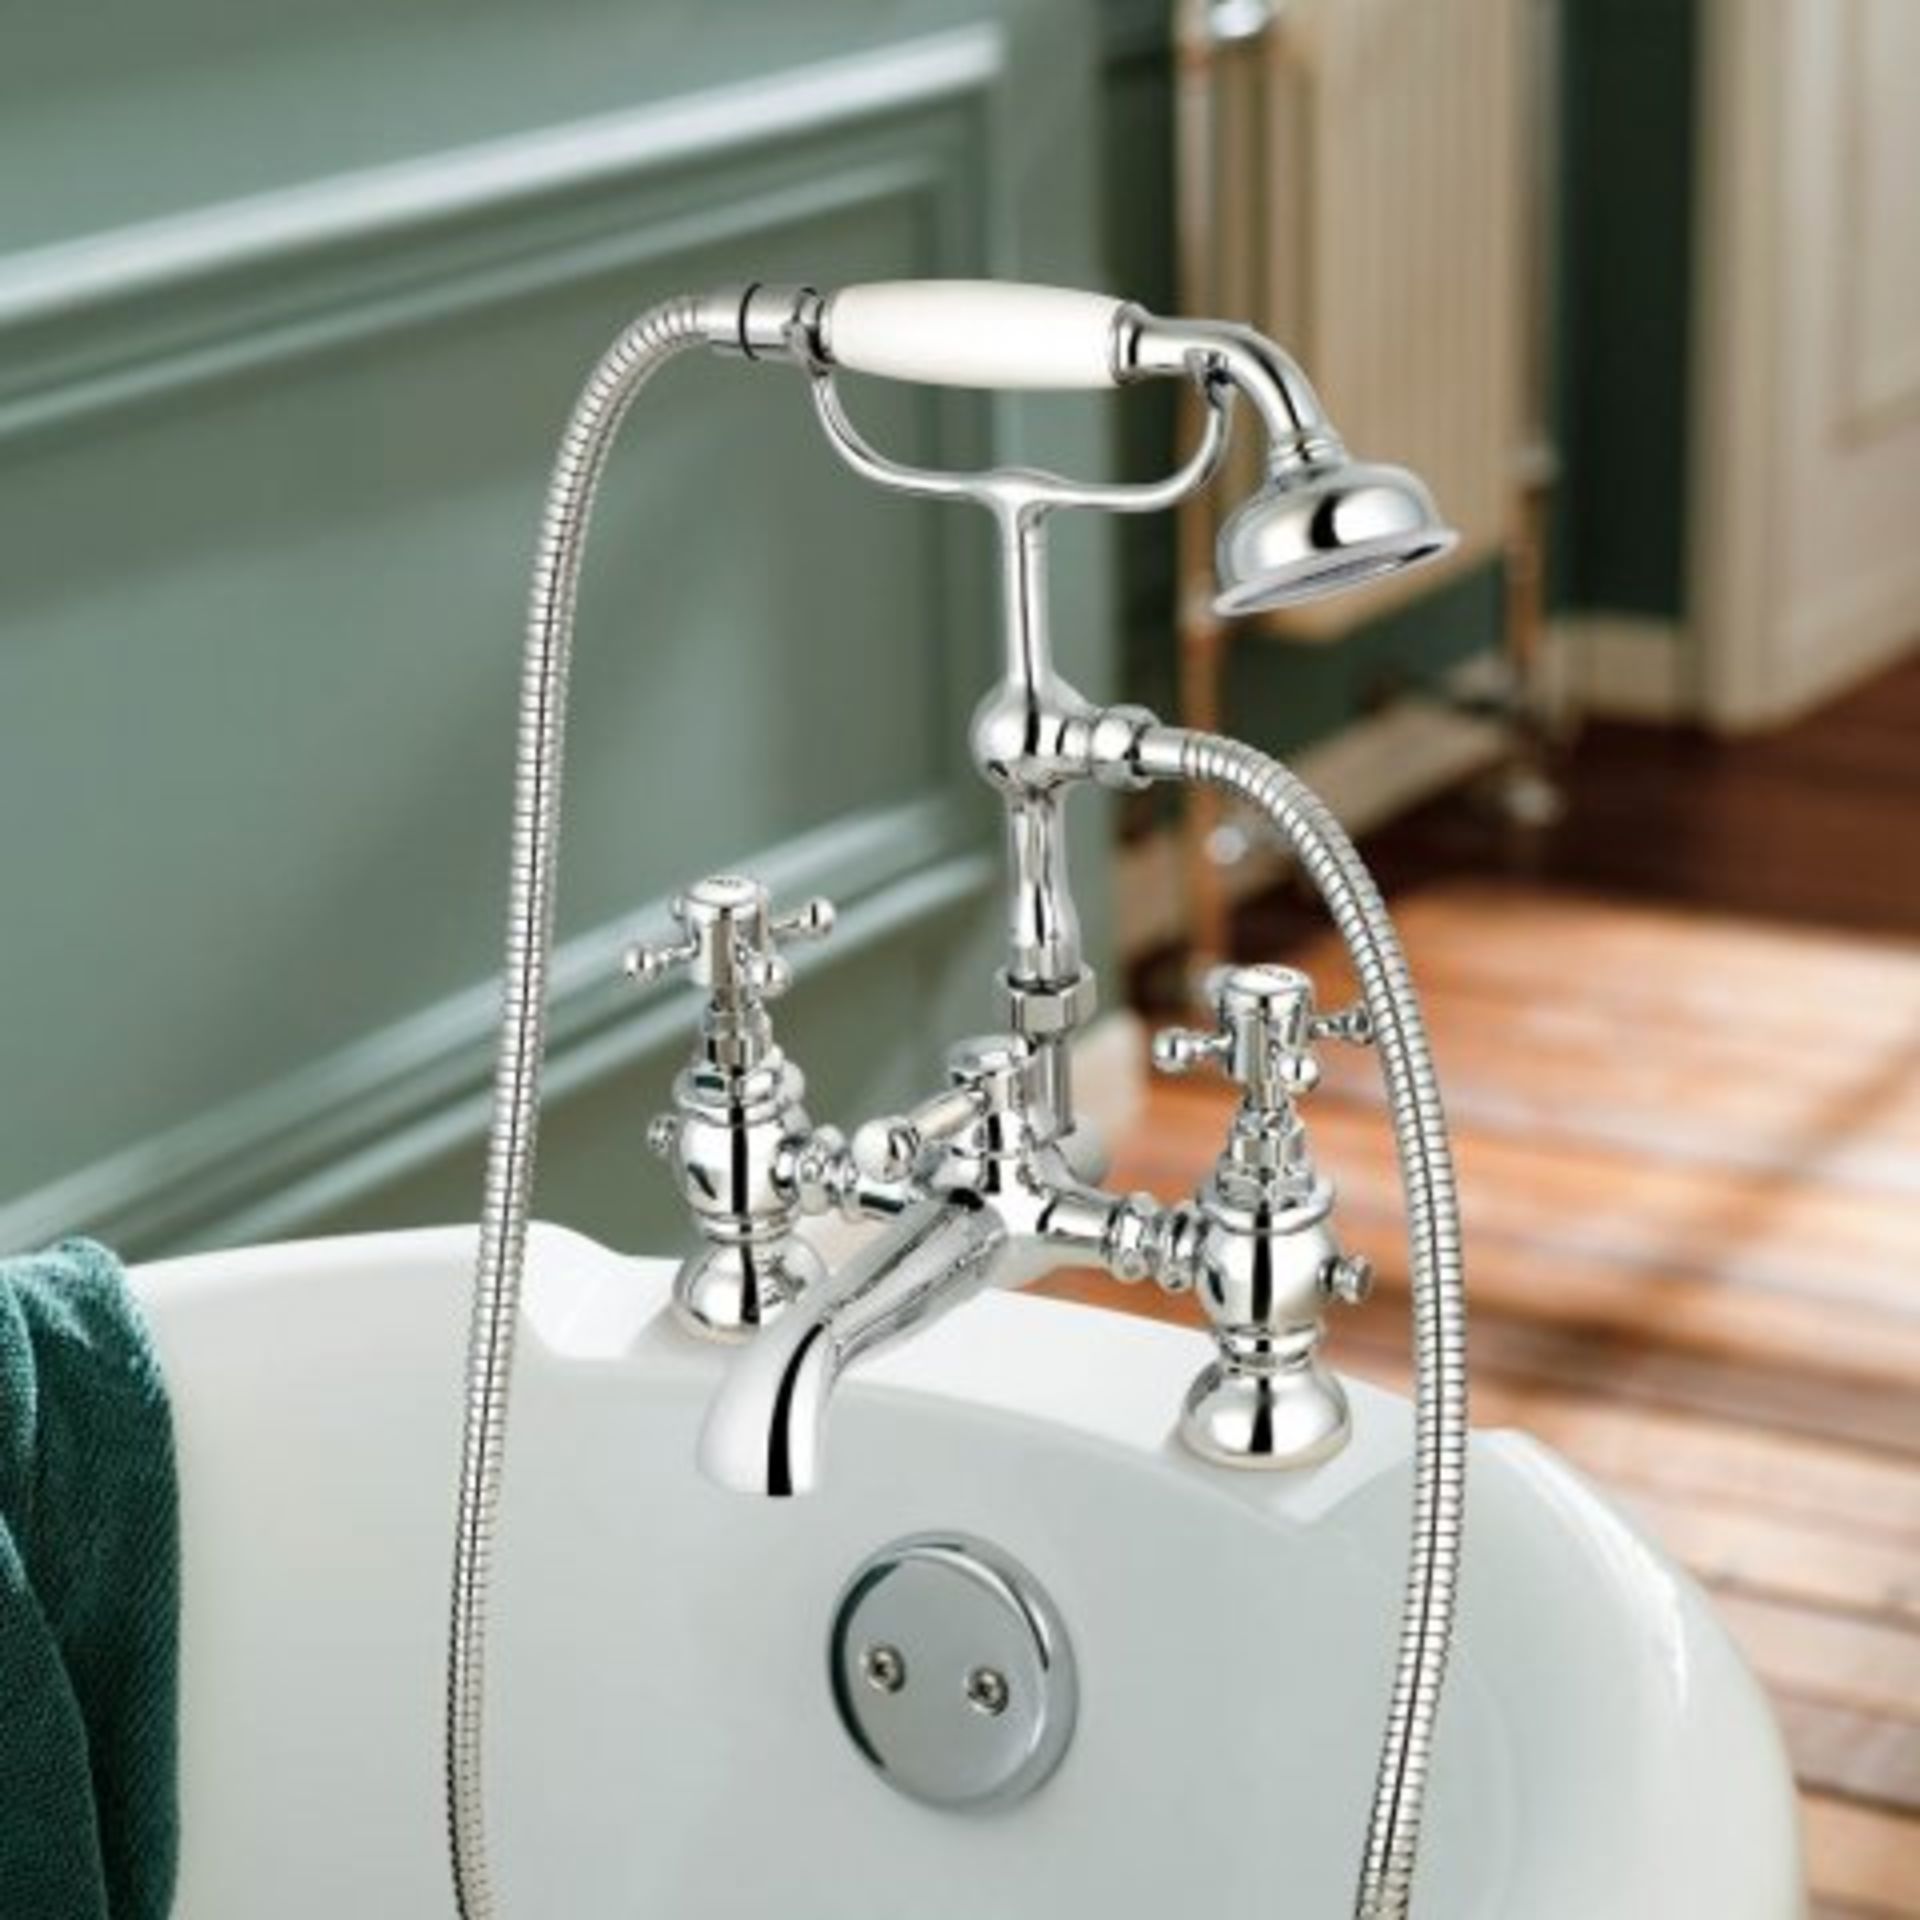 (V85) Victoria II Bath Shower Mixer - Traditional Tap with Hand Held Shower Our great range of